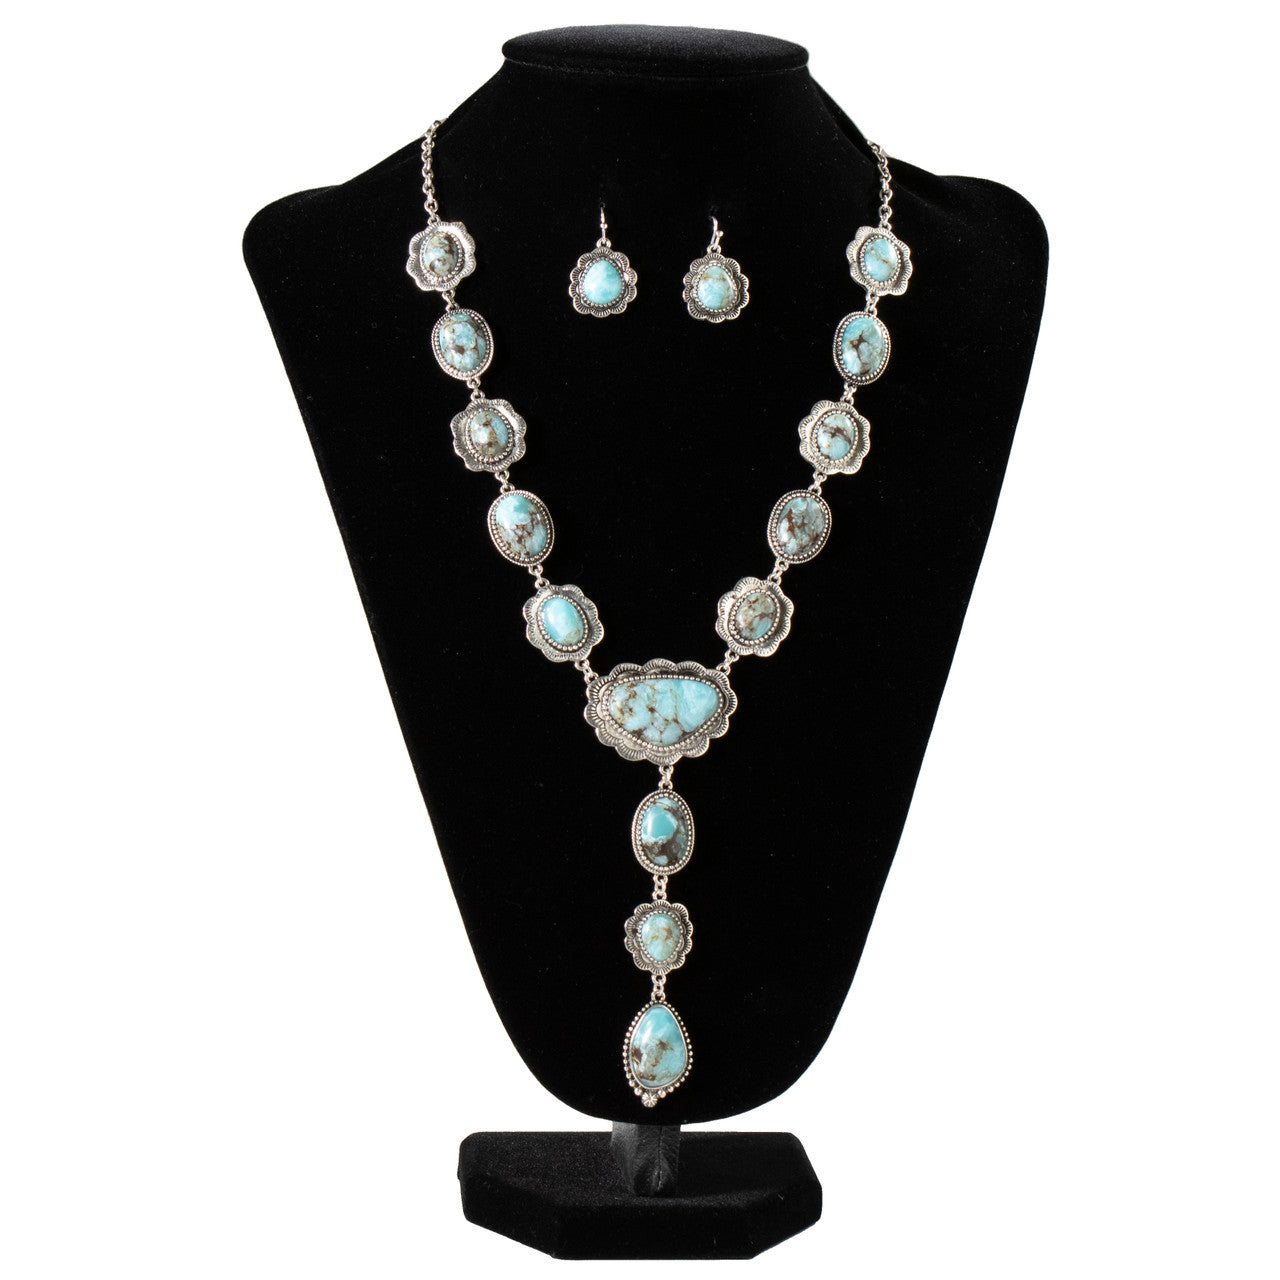 Silver_Strike_Ladies_Earrings_and_Necklace_Set_Matte_Stones_Turquoise_prd_84689_s_d450021971__16094.jpg